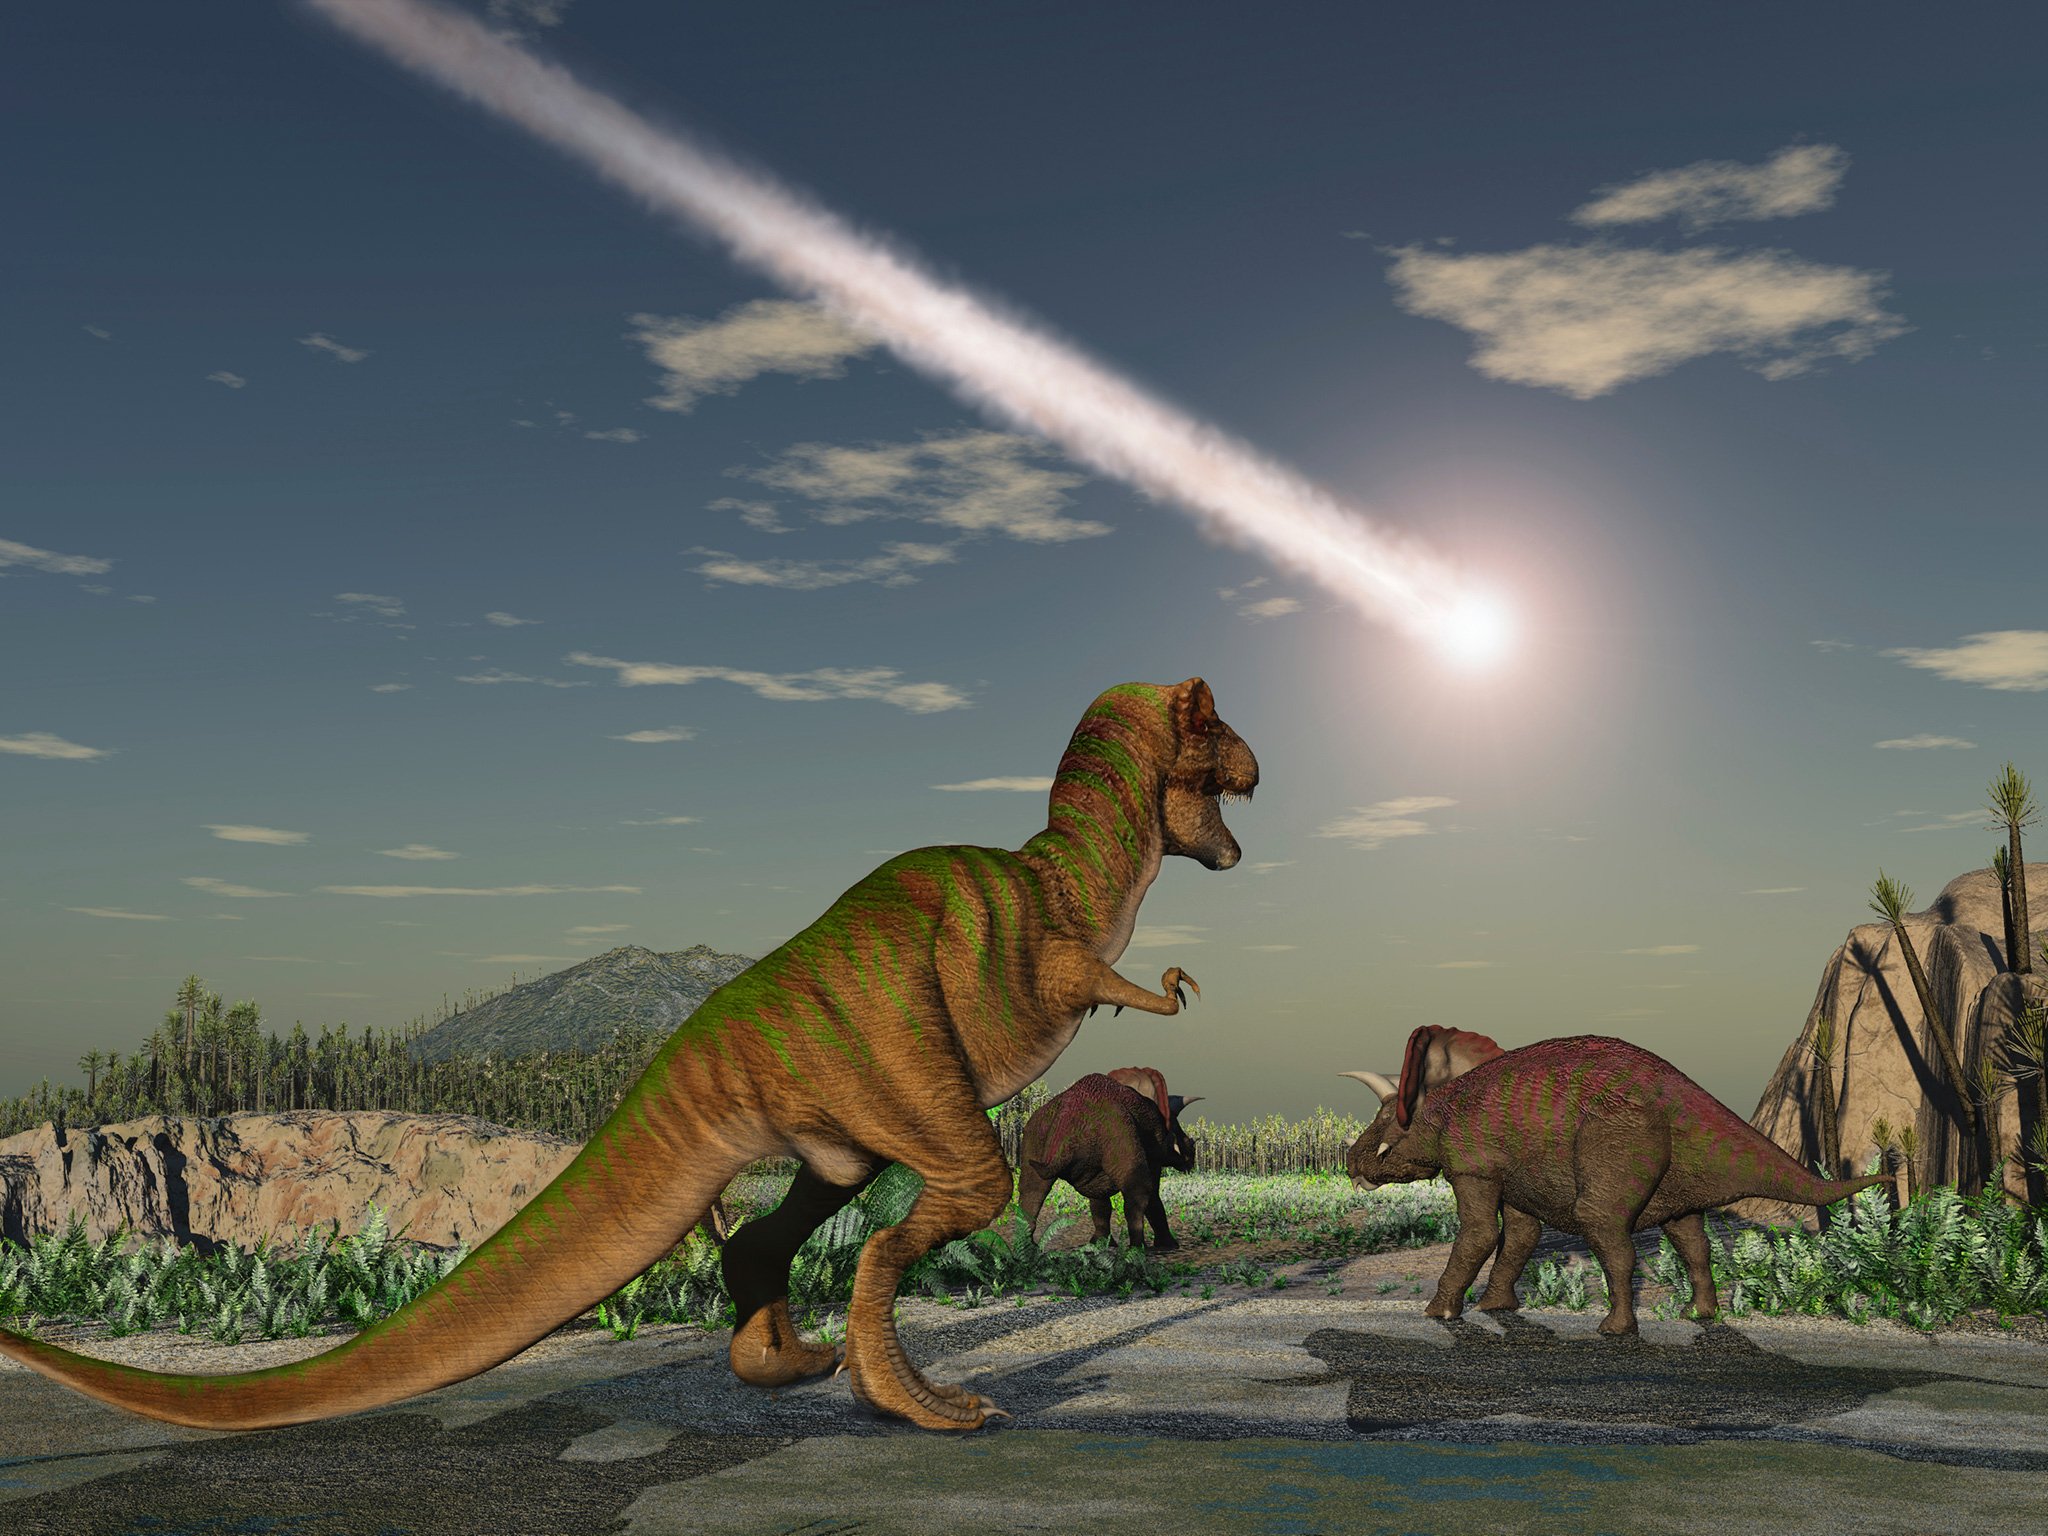 Dinosaur extinction mystery solved? Asteroid hit oil field causing ...